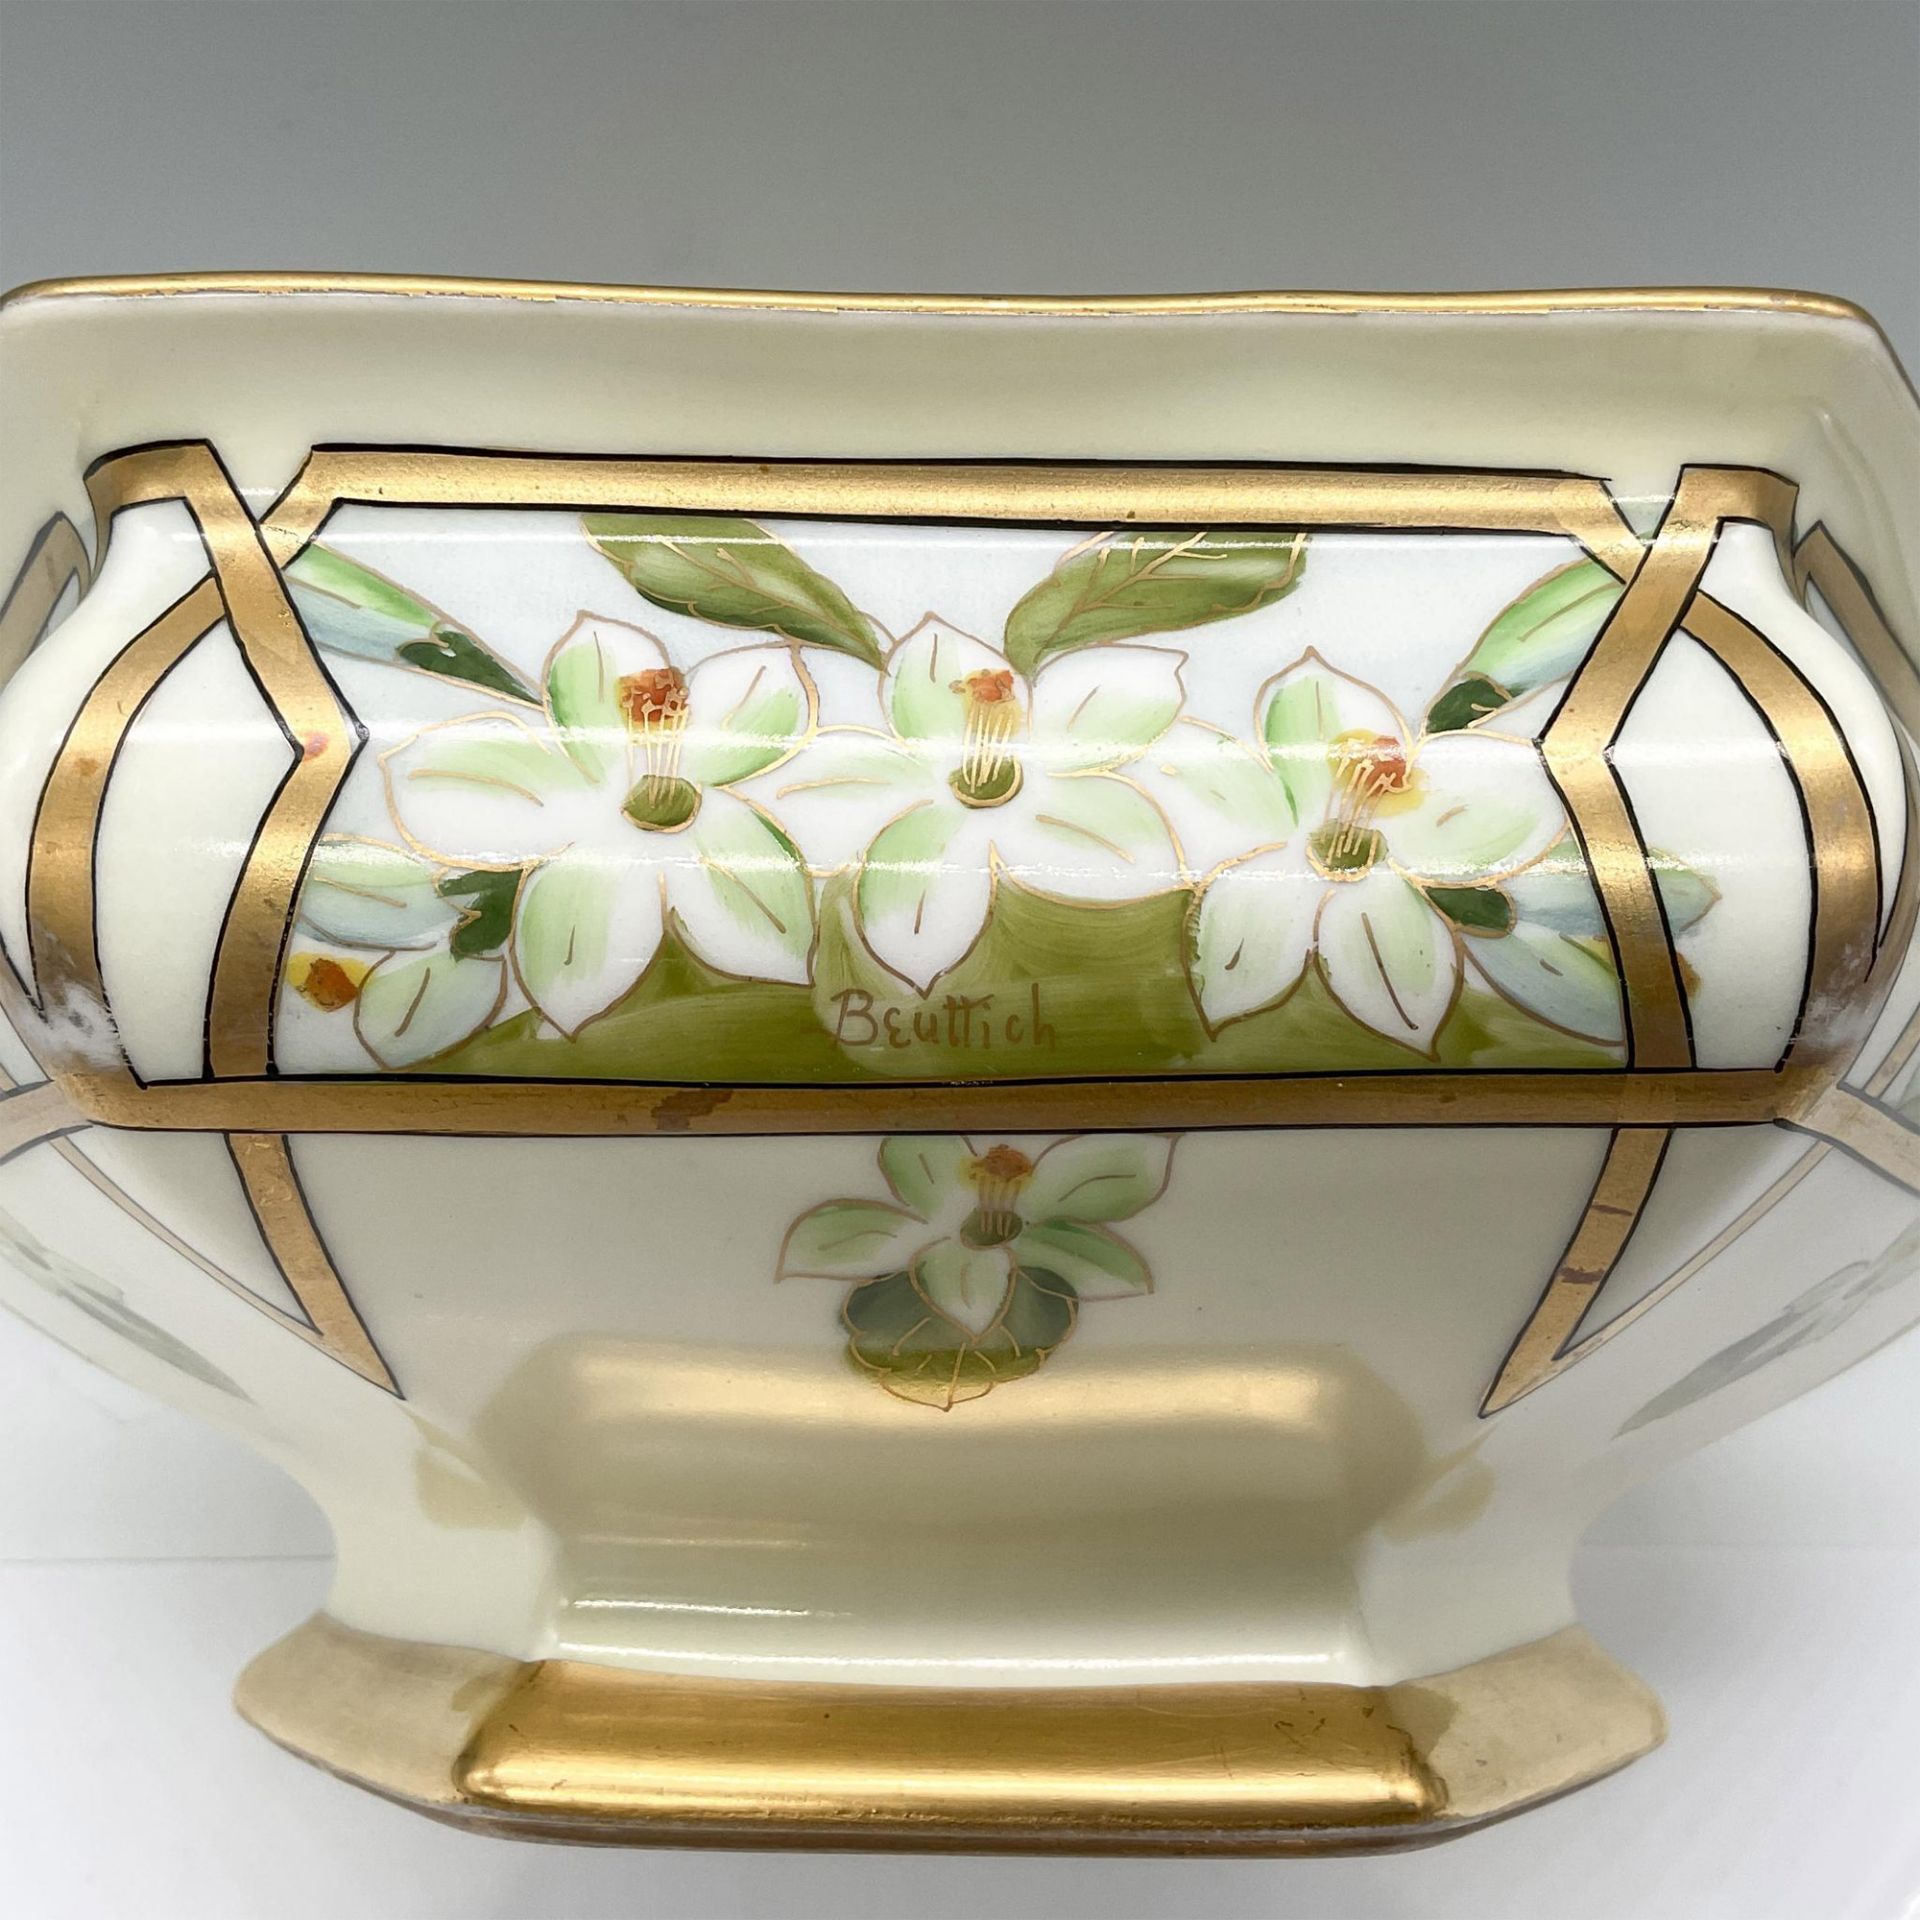 Pickard China by Beuttich Footed Bowl, Signed - Image 5 of 5